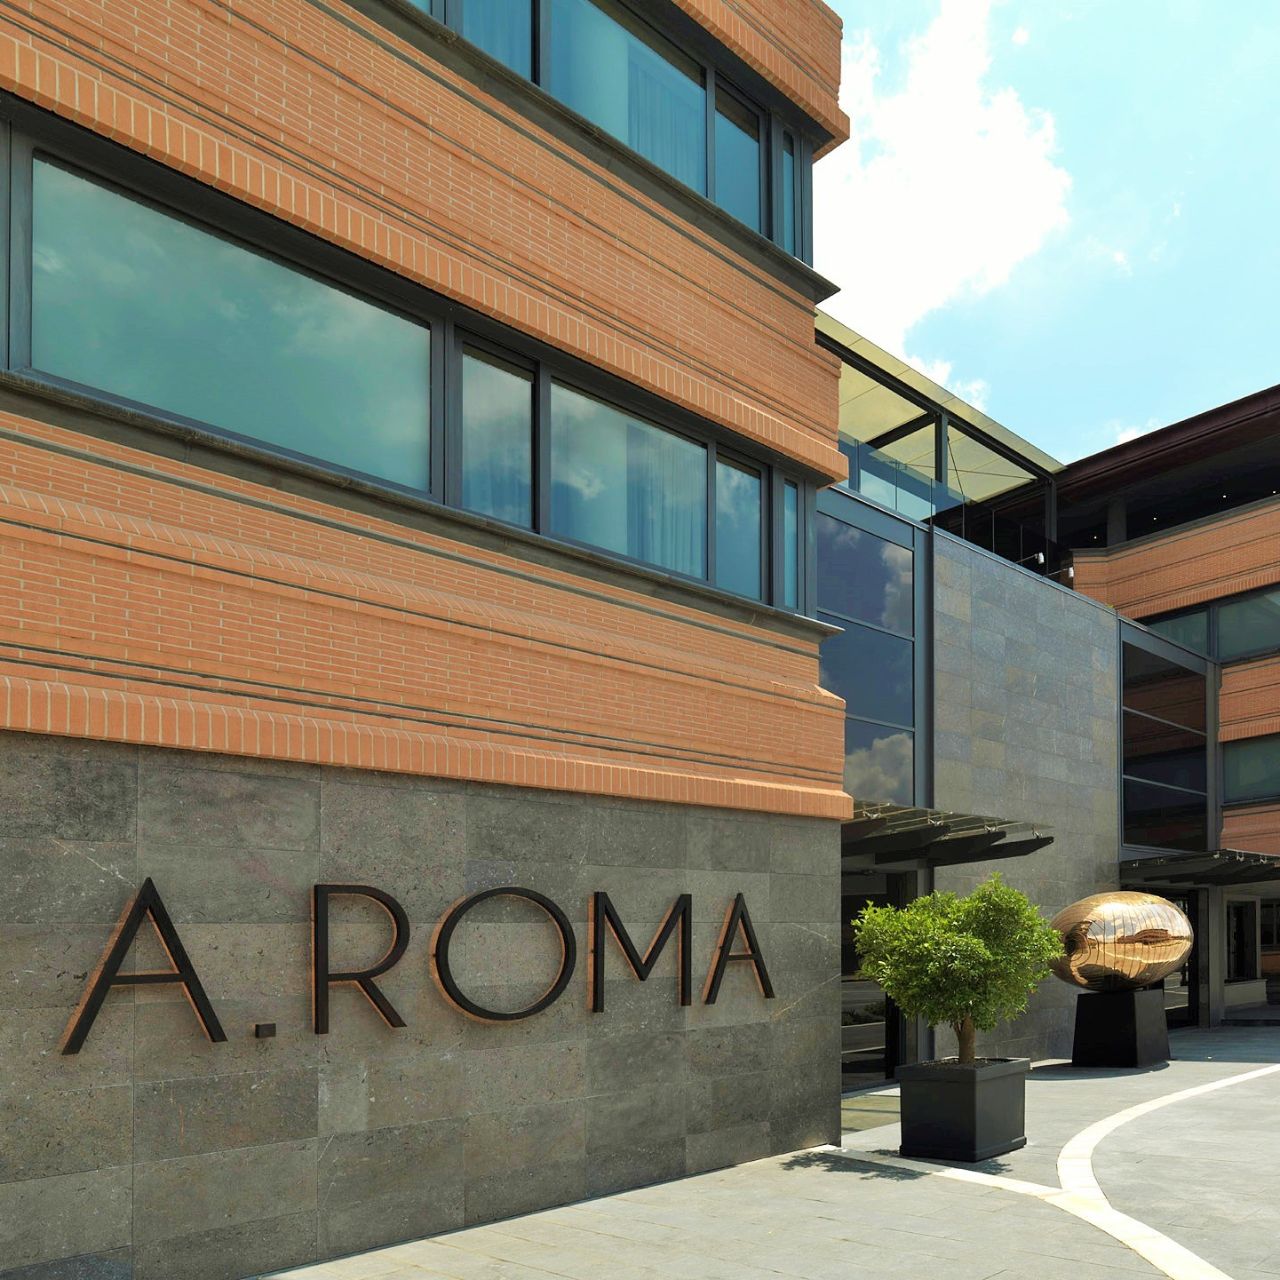 A.Roma Lifestyle Hotel - HOTEL INFO